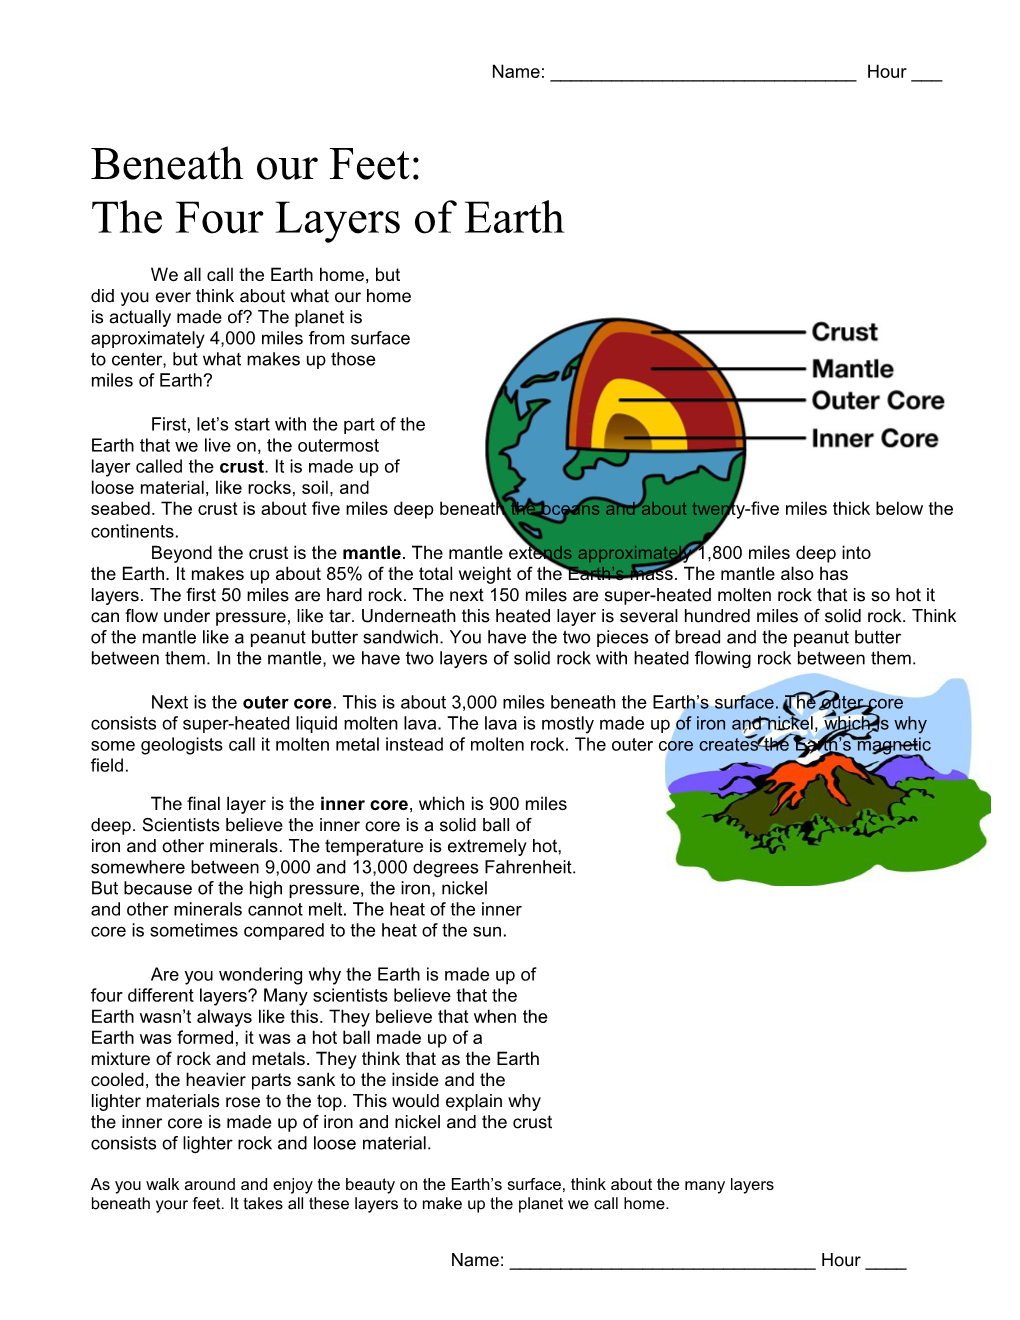 The Four Layers of Earth